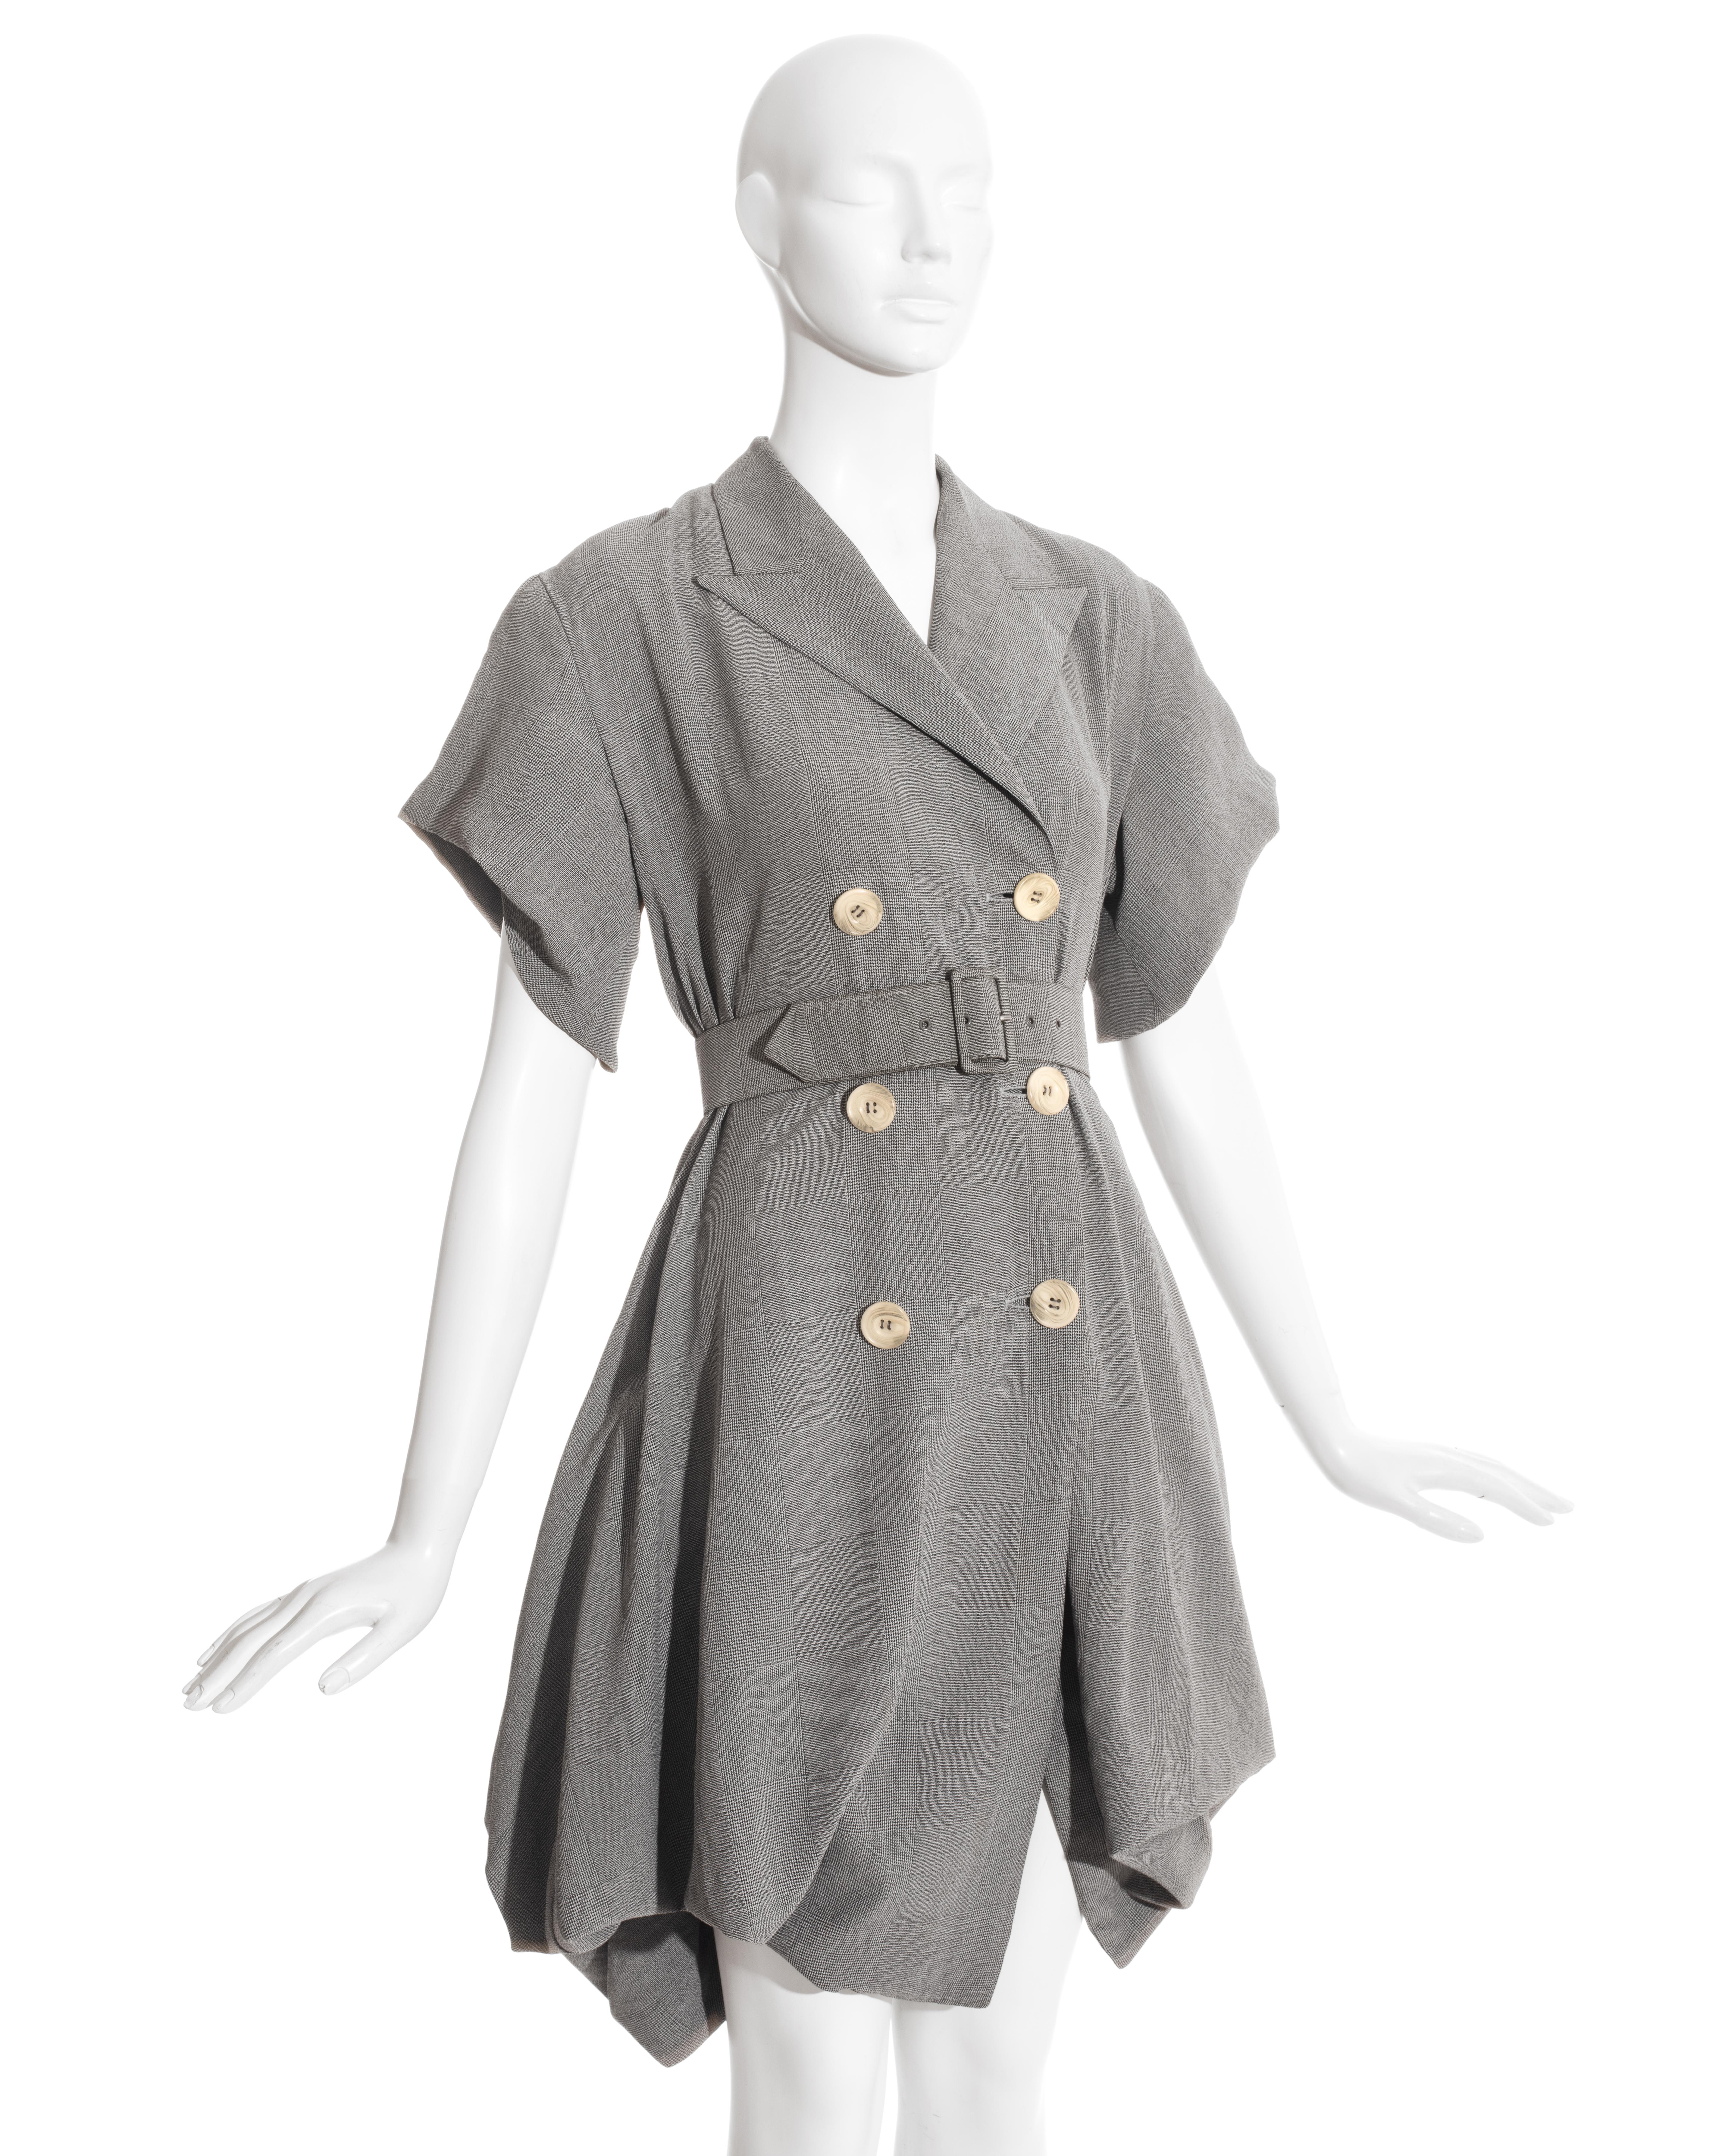 Gray John Galliano grey rayon checked Blanche Dubois bustled coat dress, ss 1988 For Sale